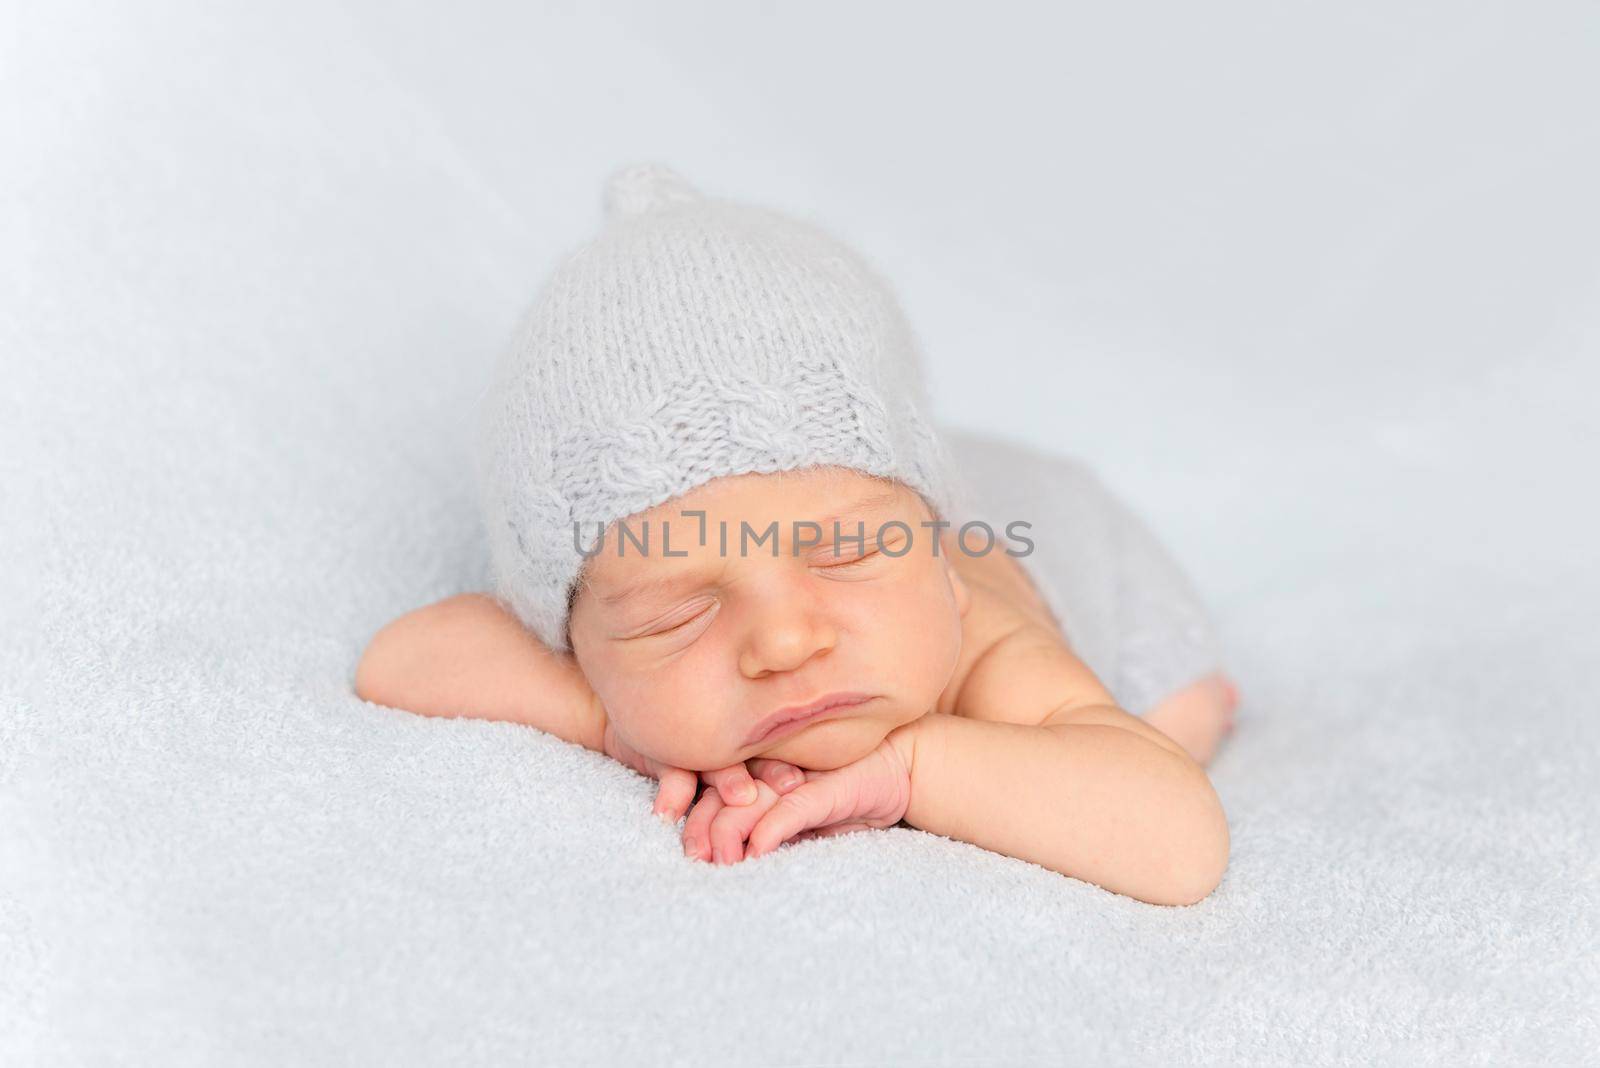 Tender little baby comfortably sleeping on belly. Newborn in tushy up pose on white blanket